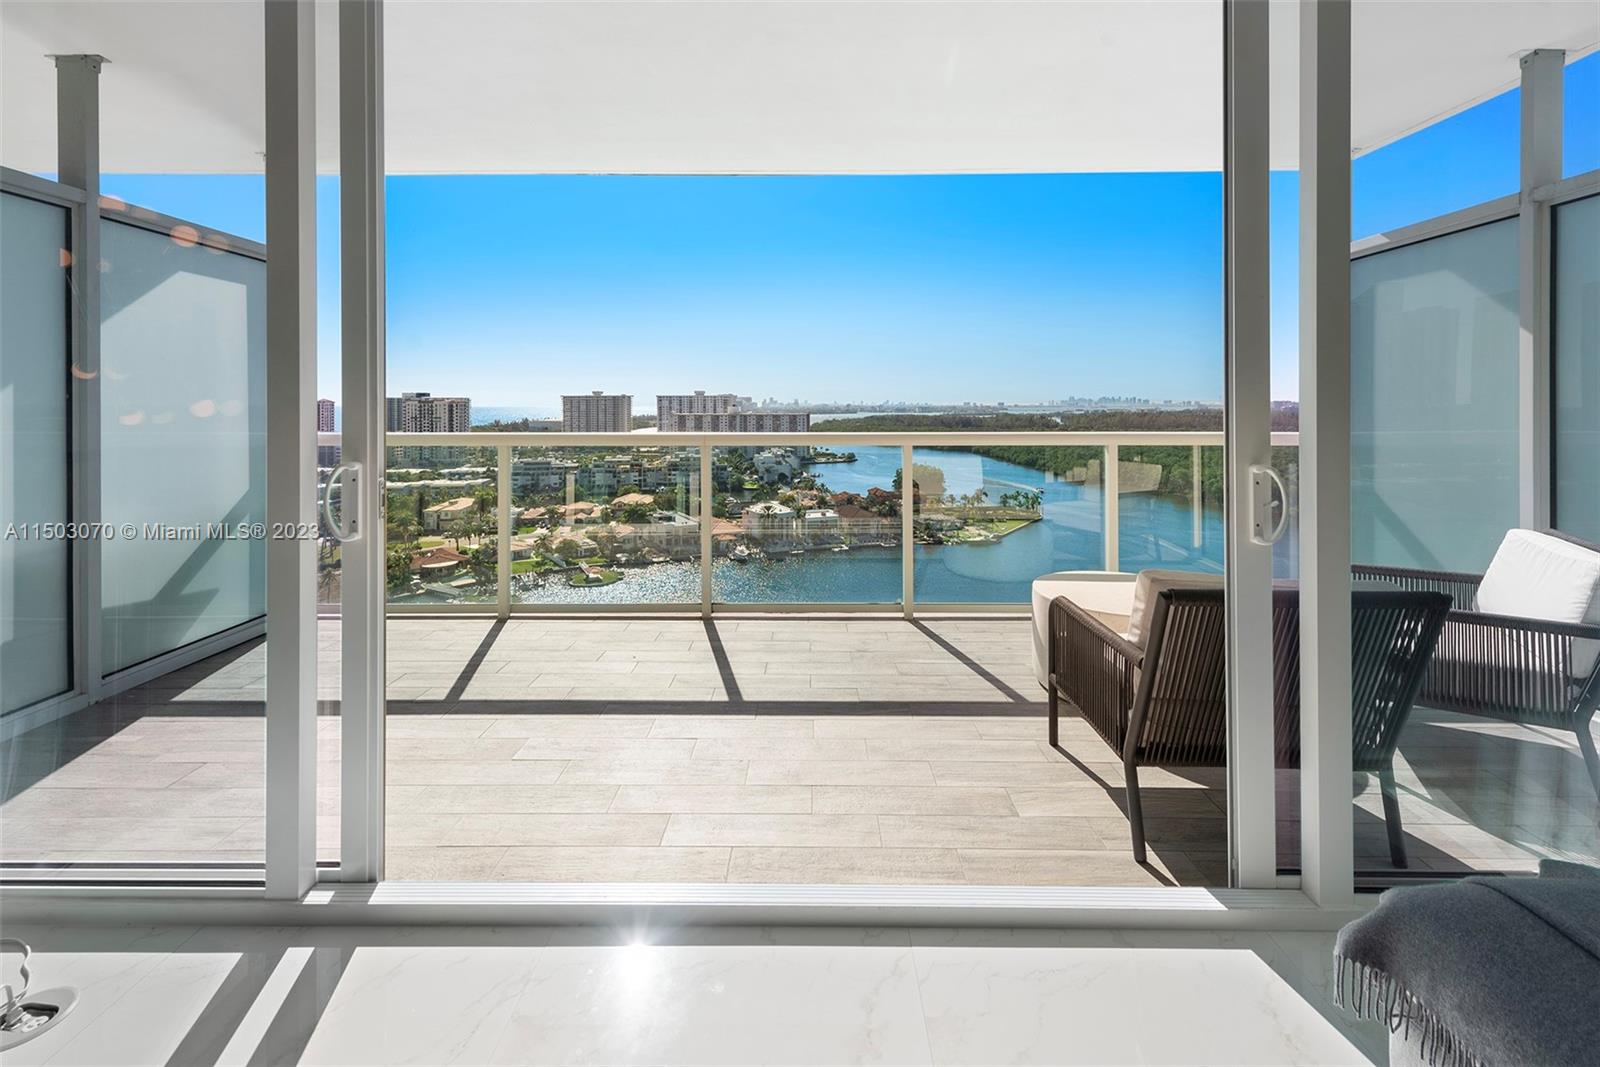 Discover the allure of 1904, the highest non-penthouse residence at 400 Sunny Isles. This 3-bed, 2.5-bath condo presents sweeping views of the ocean, Intercoastal waterway, and downtown skyline. Standout features include floor-to-ceiling windows, spacious kitchen with island, top-of-the-line appliances, and a generous primary suite/bath. 5-star amenities include two assigned parking spots, valet, marina, gym, spa, tennis court, bayfront pool, plunge pools, outdoor jacuzzi, and round-the-clock concierge service.